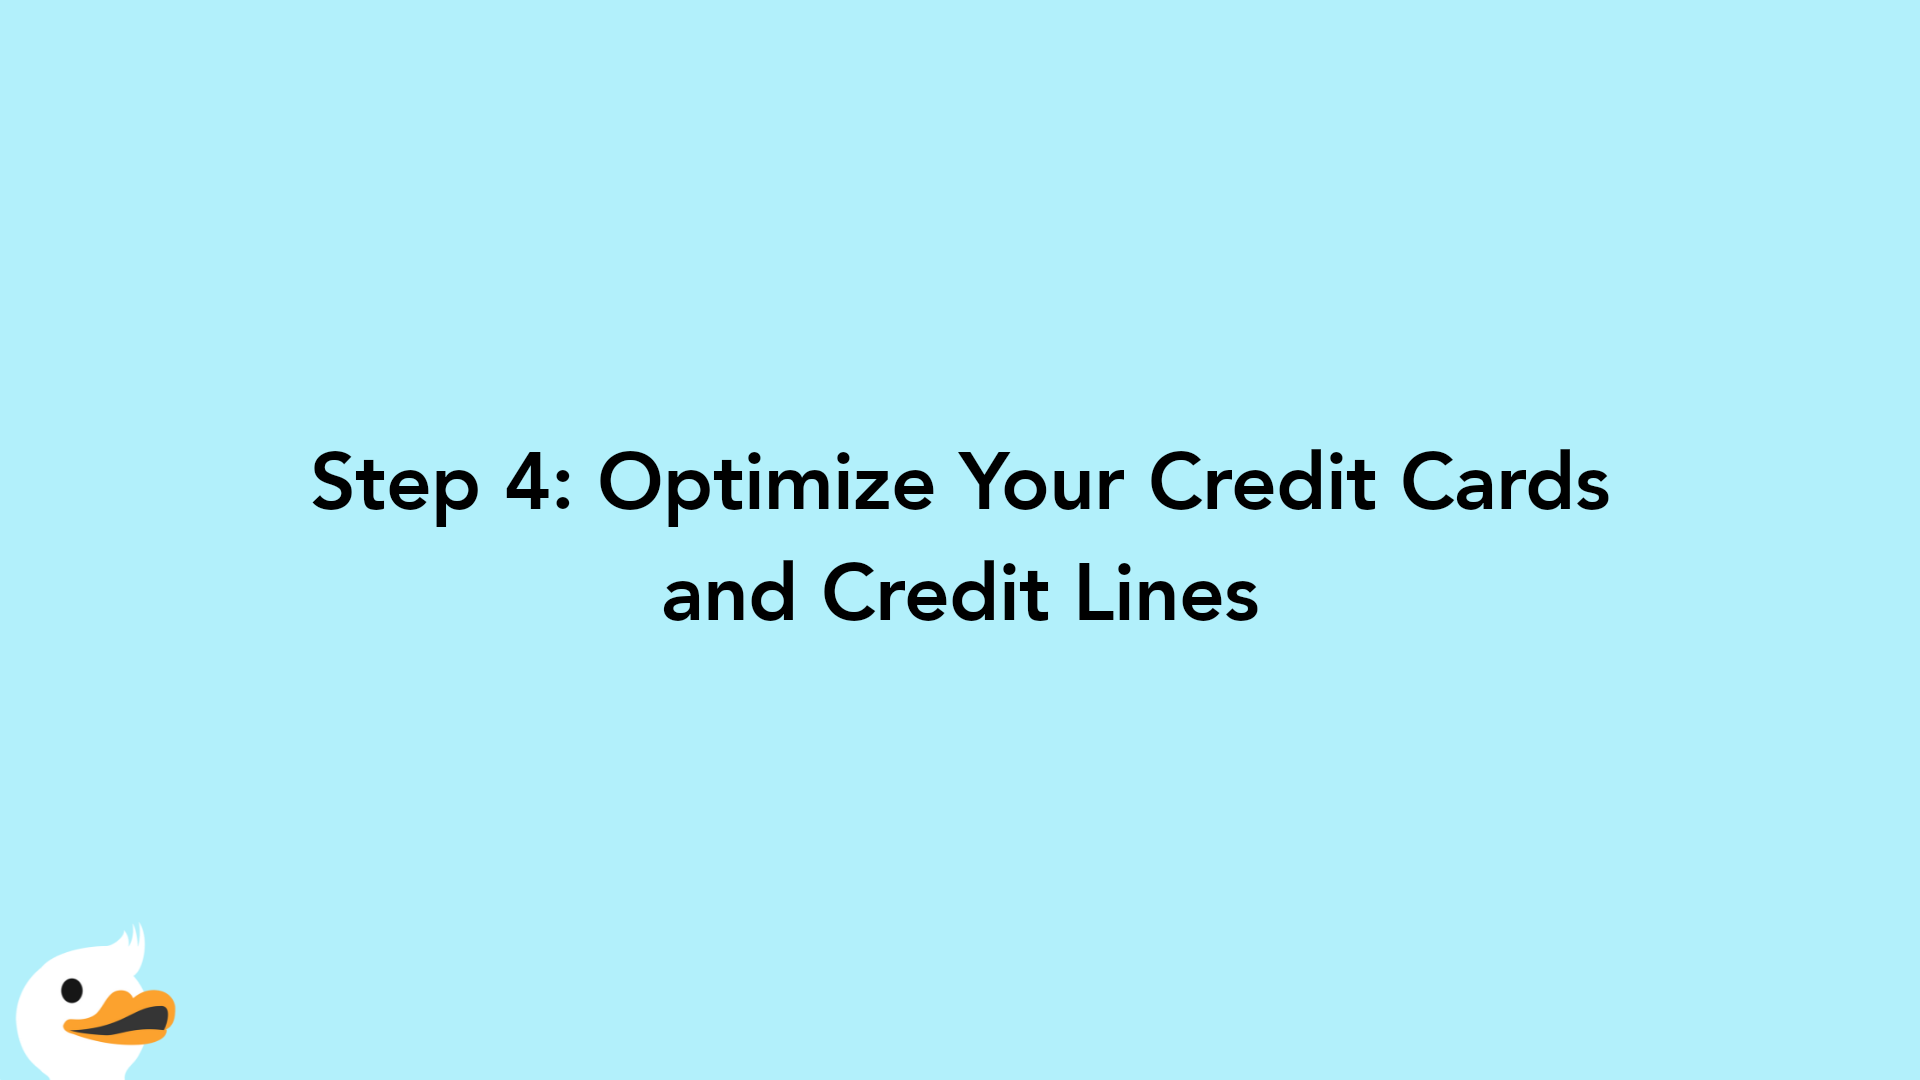 Step 4: Optimize Your Credit Cards and Credit Lines